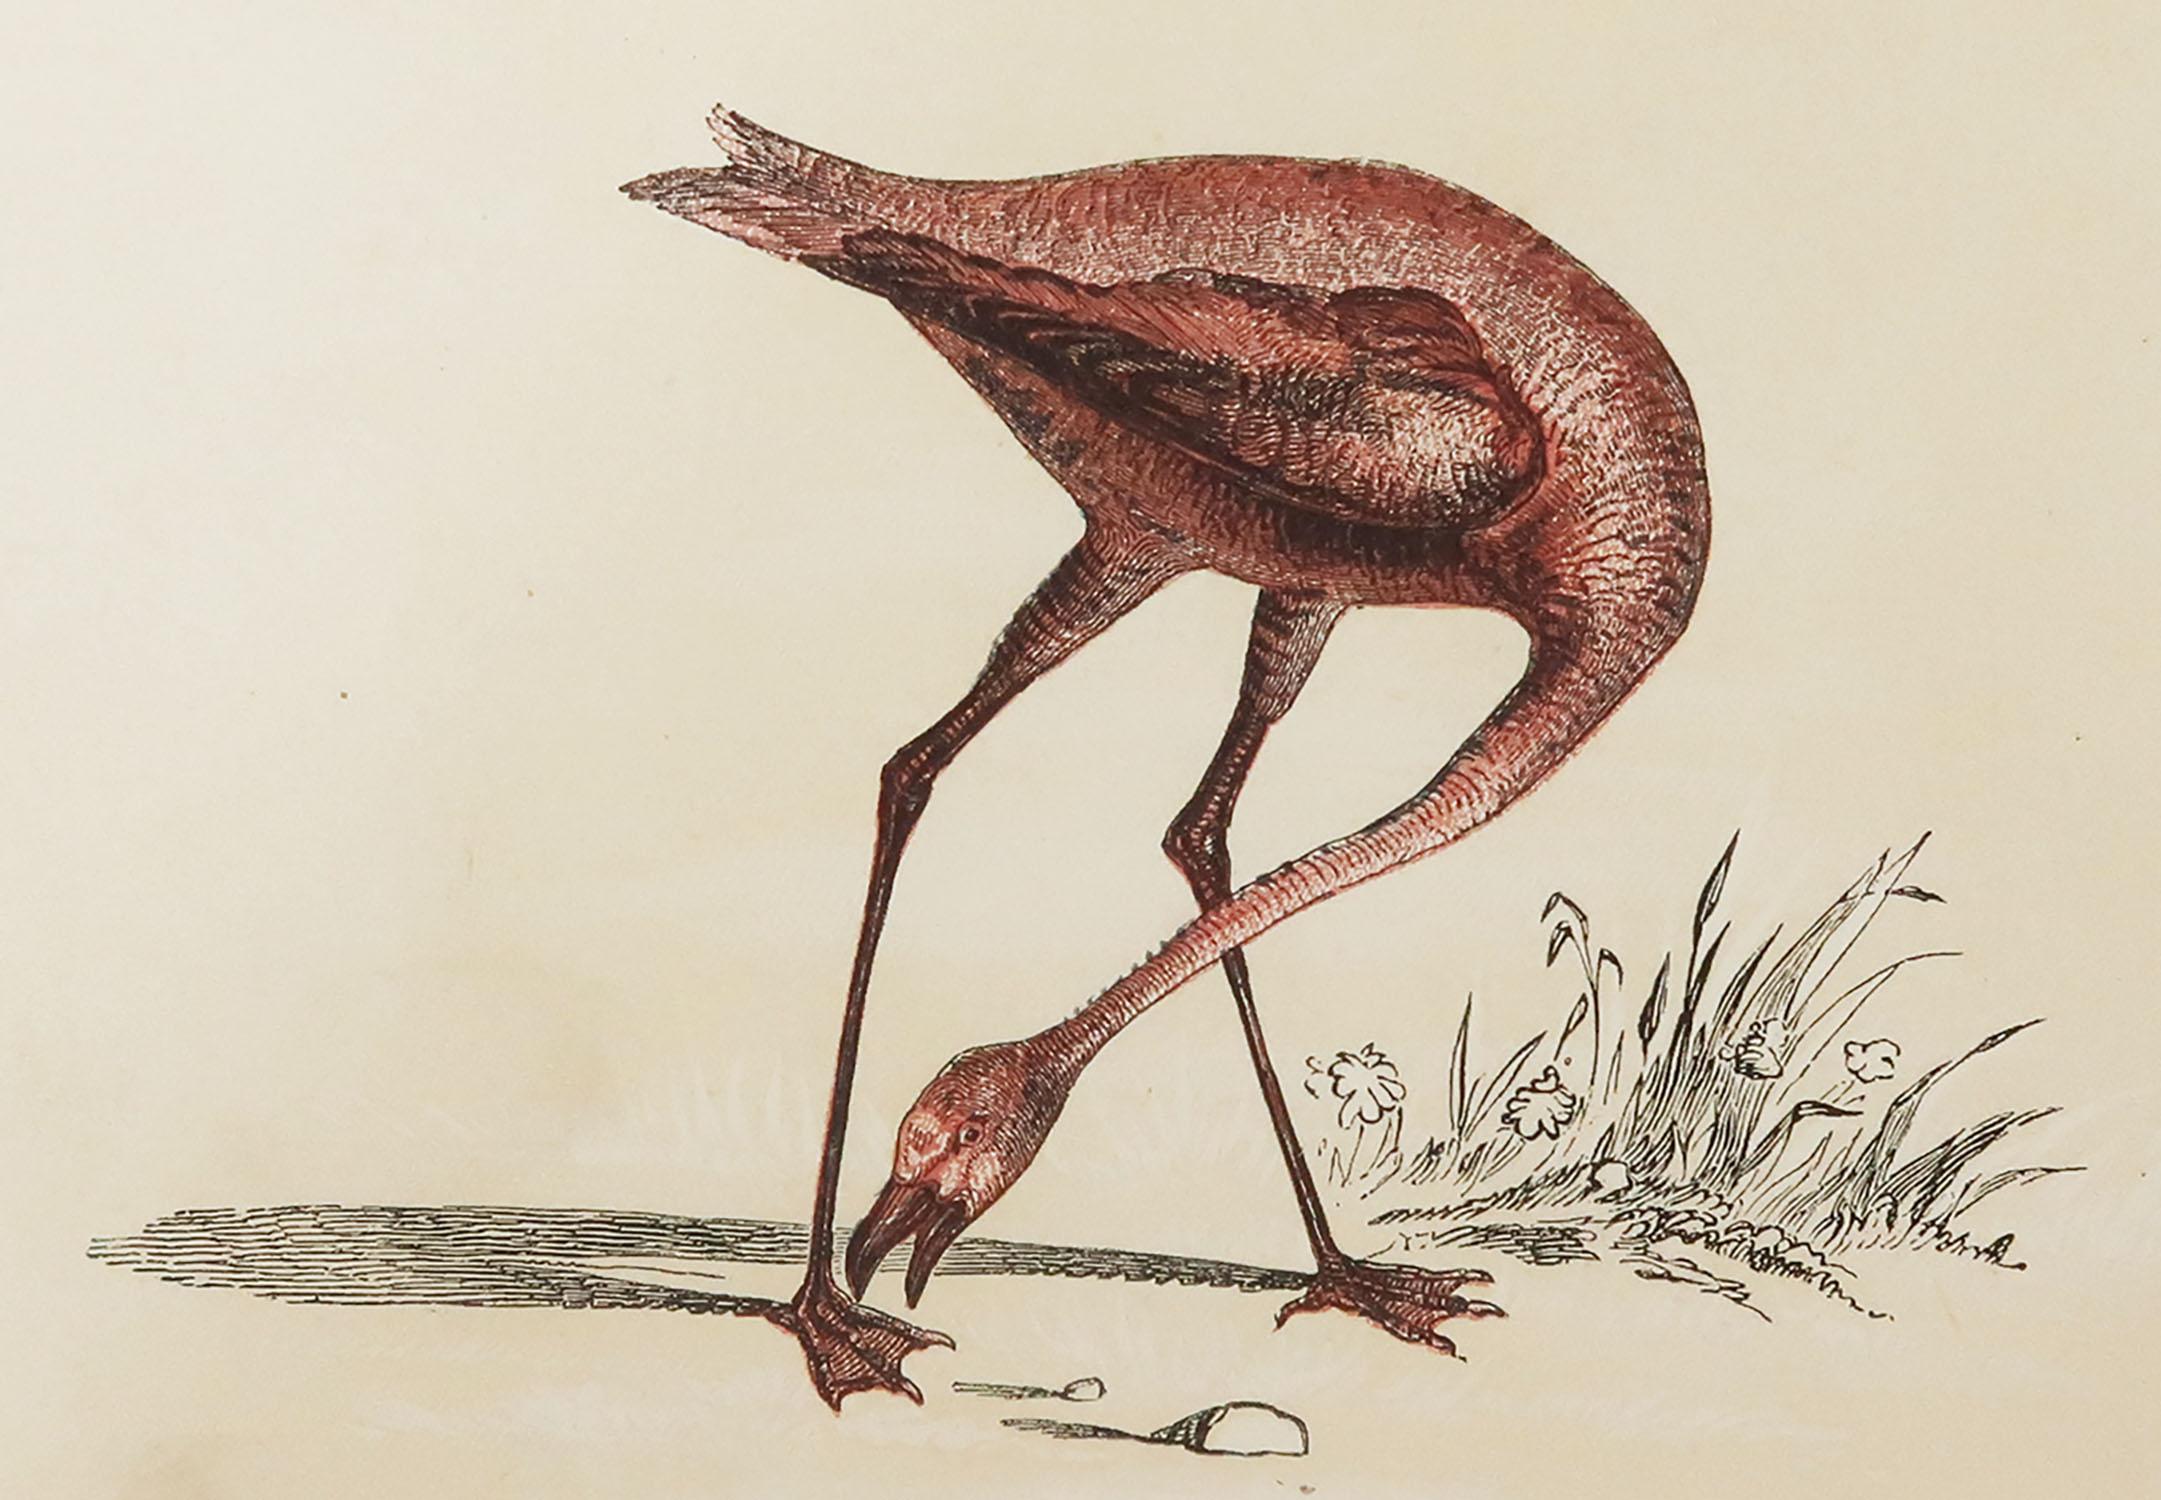 Great image of a pink flamingo

Unframed. It gives you the option of perhaps making a set up using your own choice of frames.

Lithograph with original color.

Published by Tallis, circa 1850

Crudely inscribed title has been erased at the